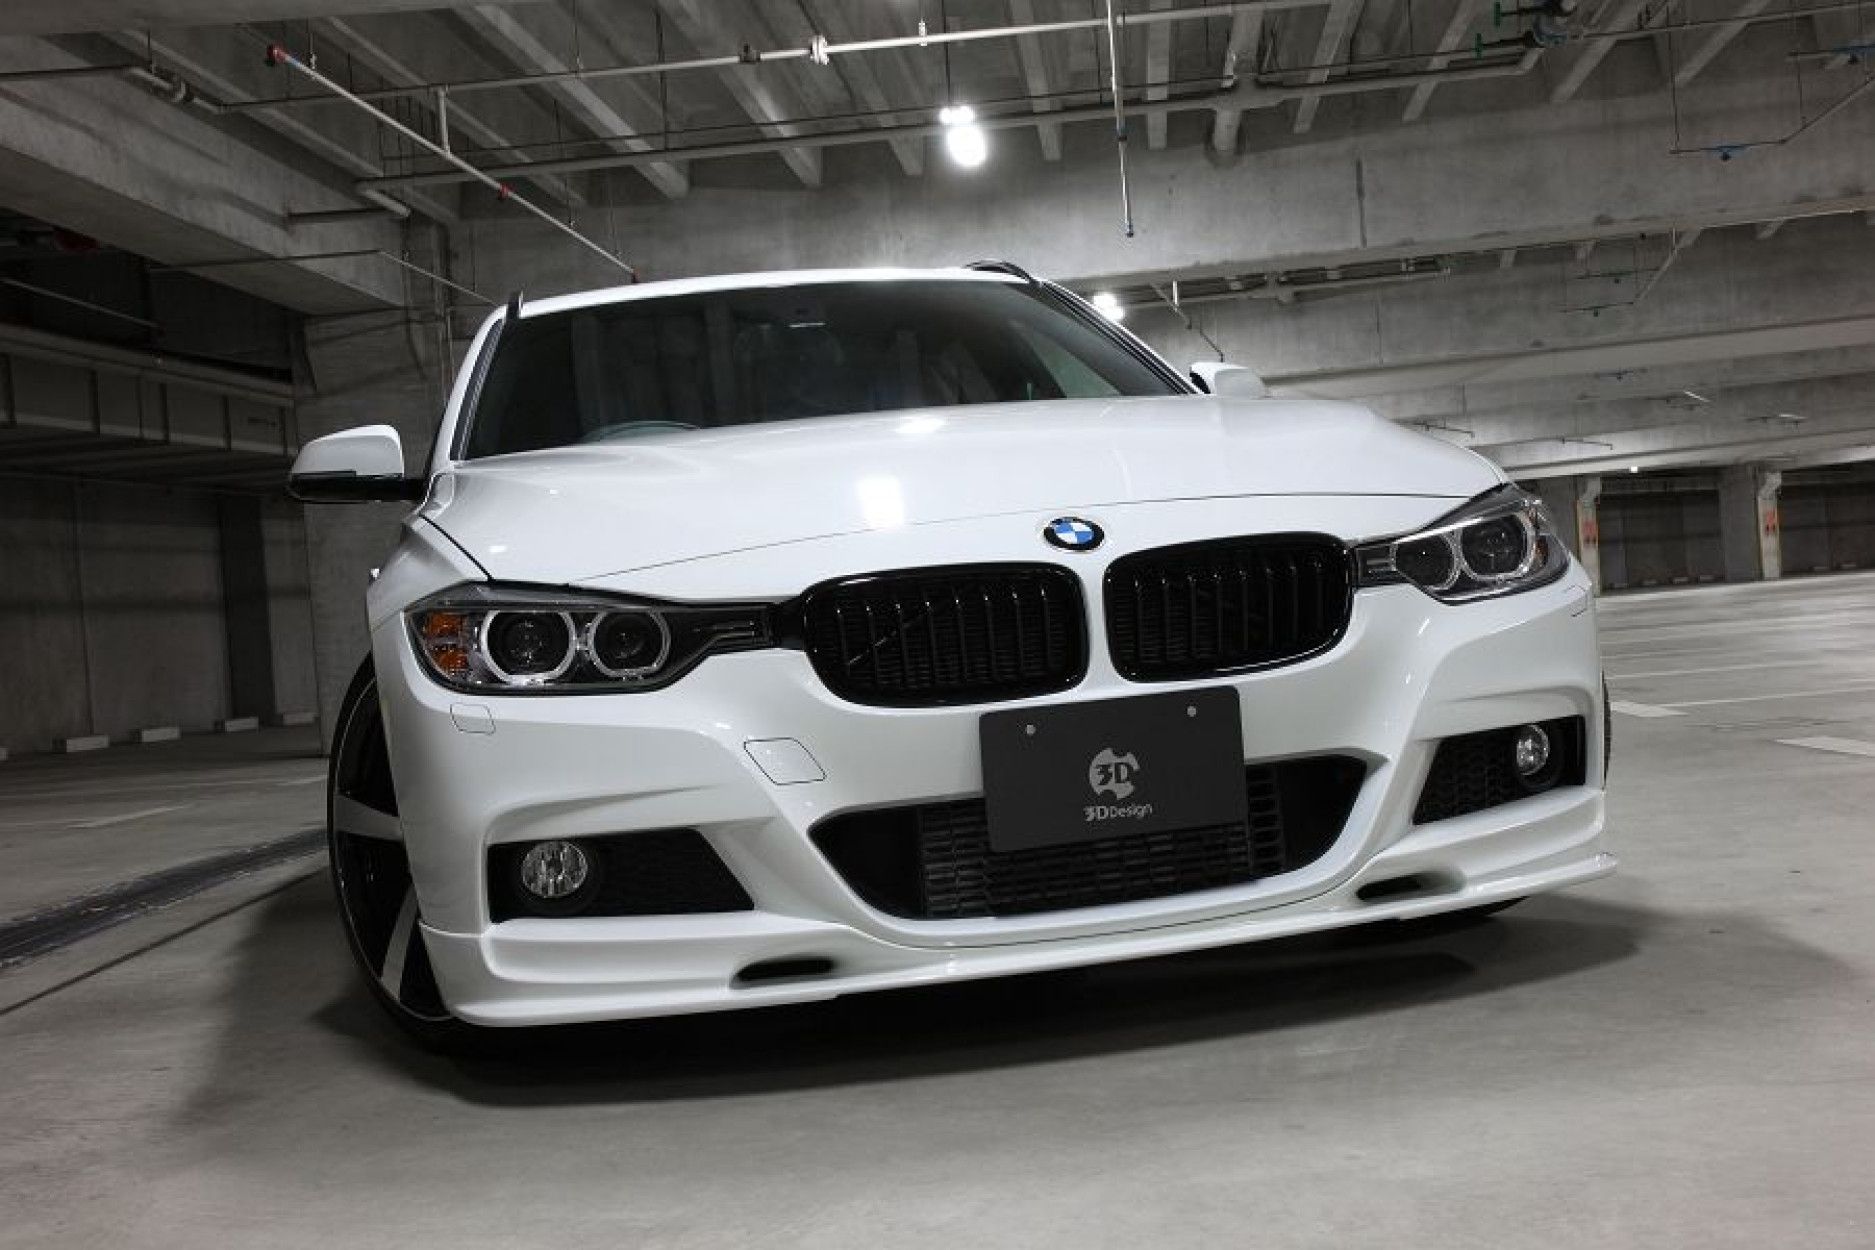 3Ddesign front lip fitting for BMW 3 Series F30 F31 with M-Tech